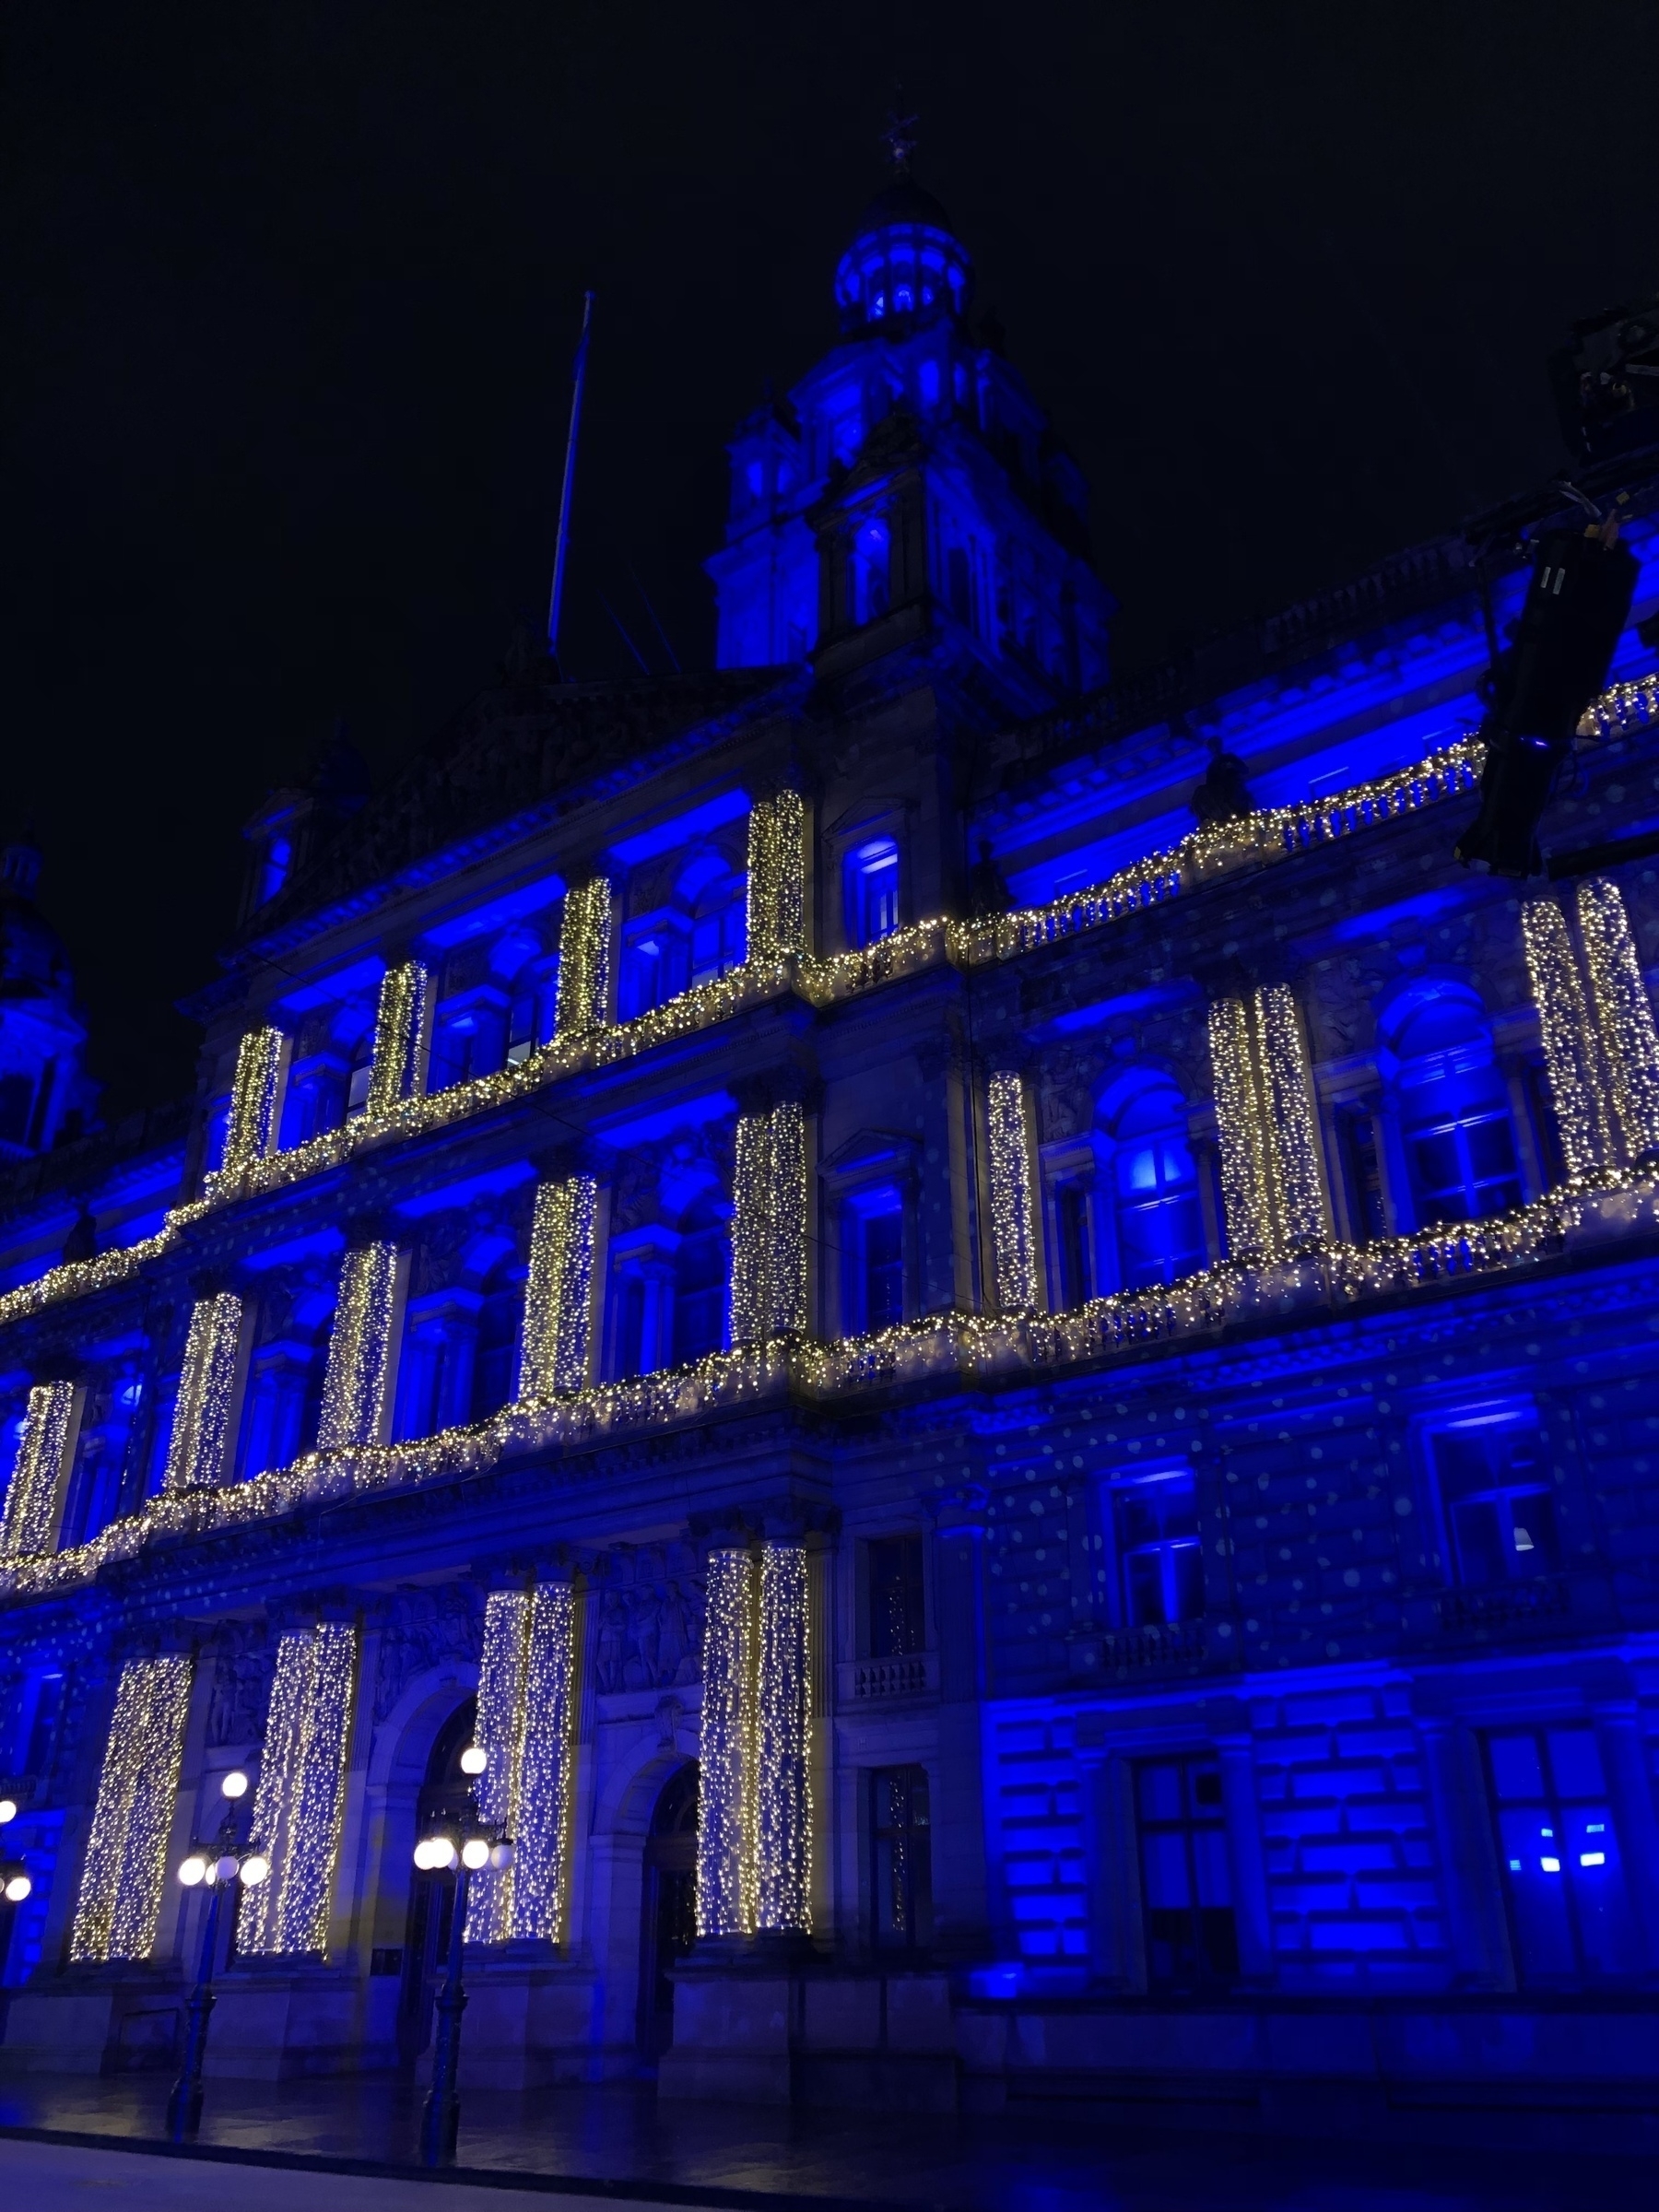 Grand building at night lit up with indigo lights